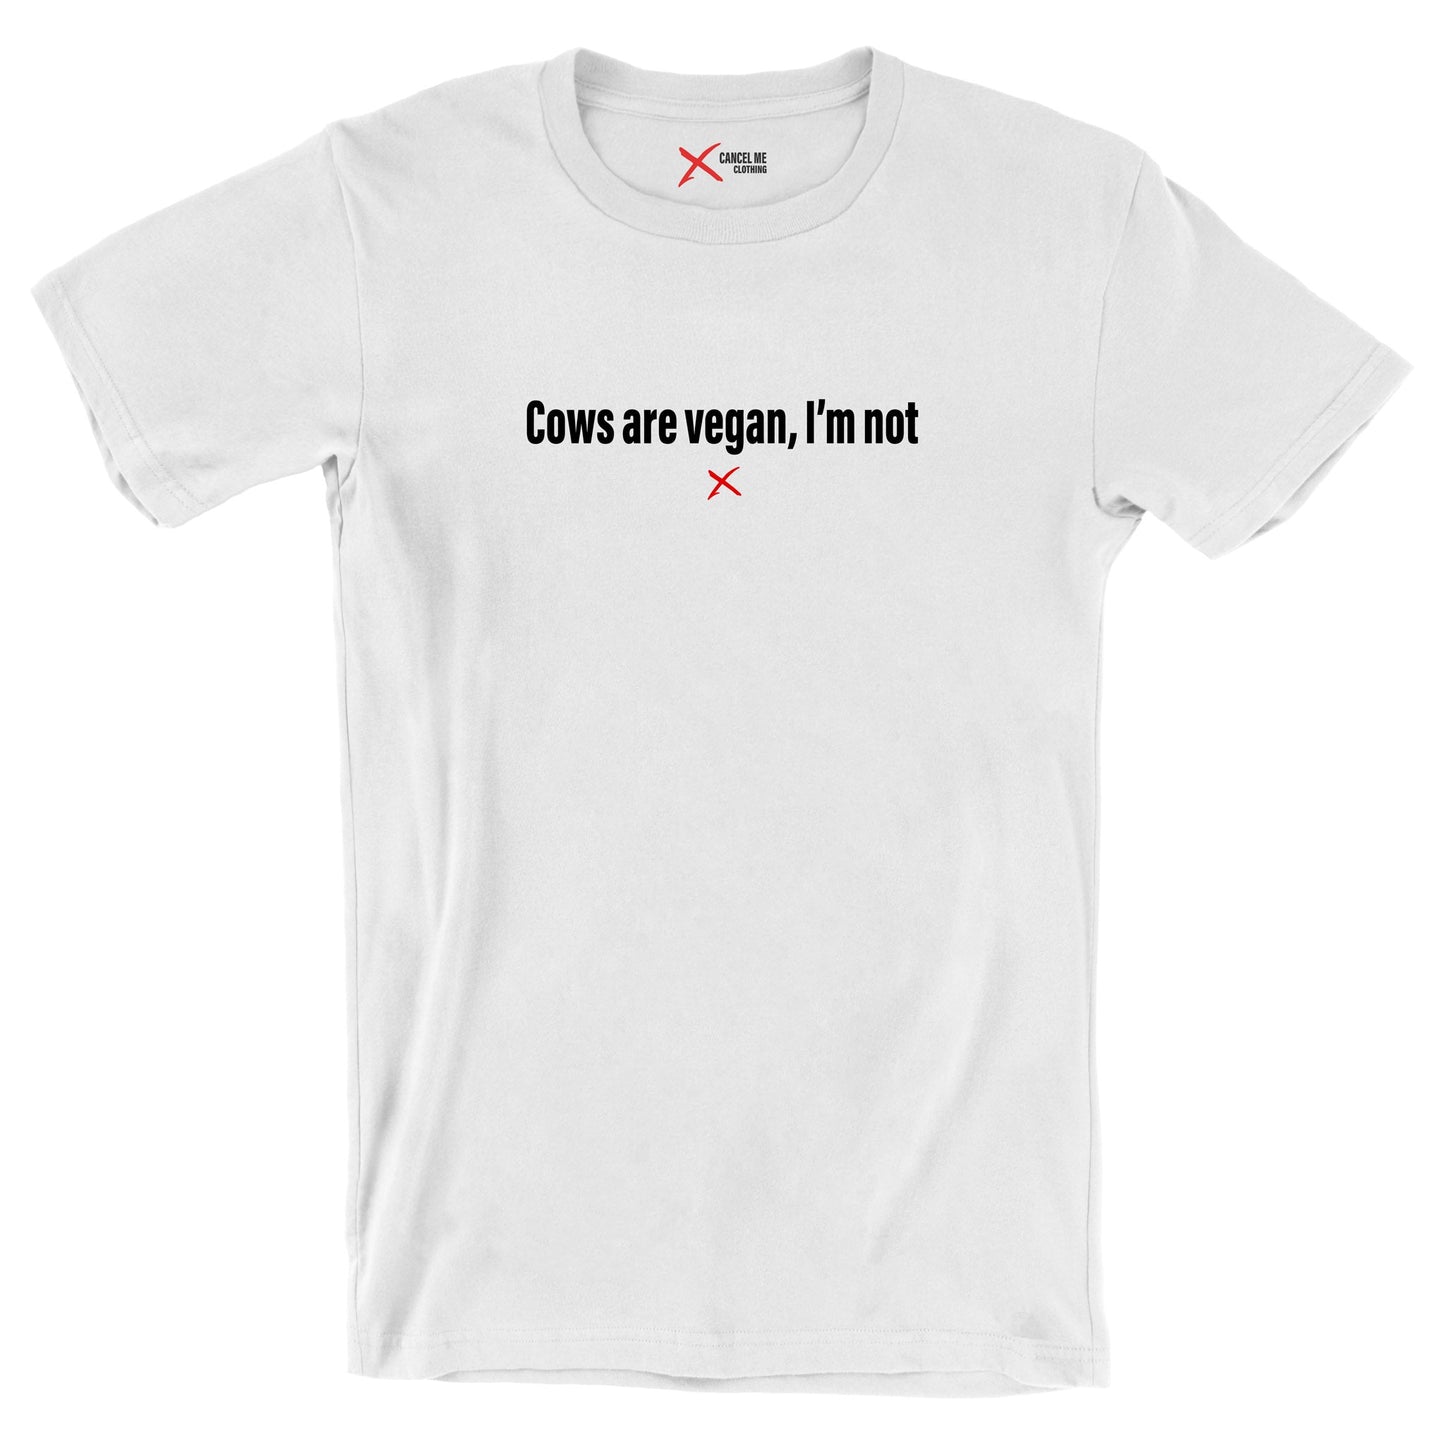 Cows are vegan, I'm not - Shirt